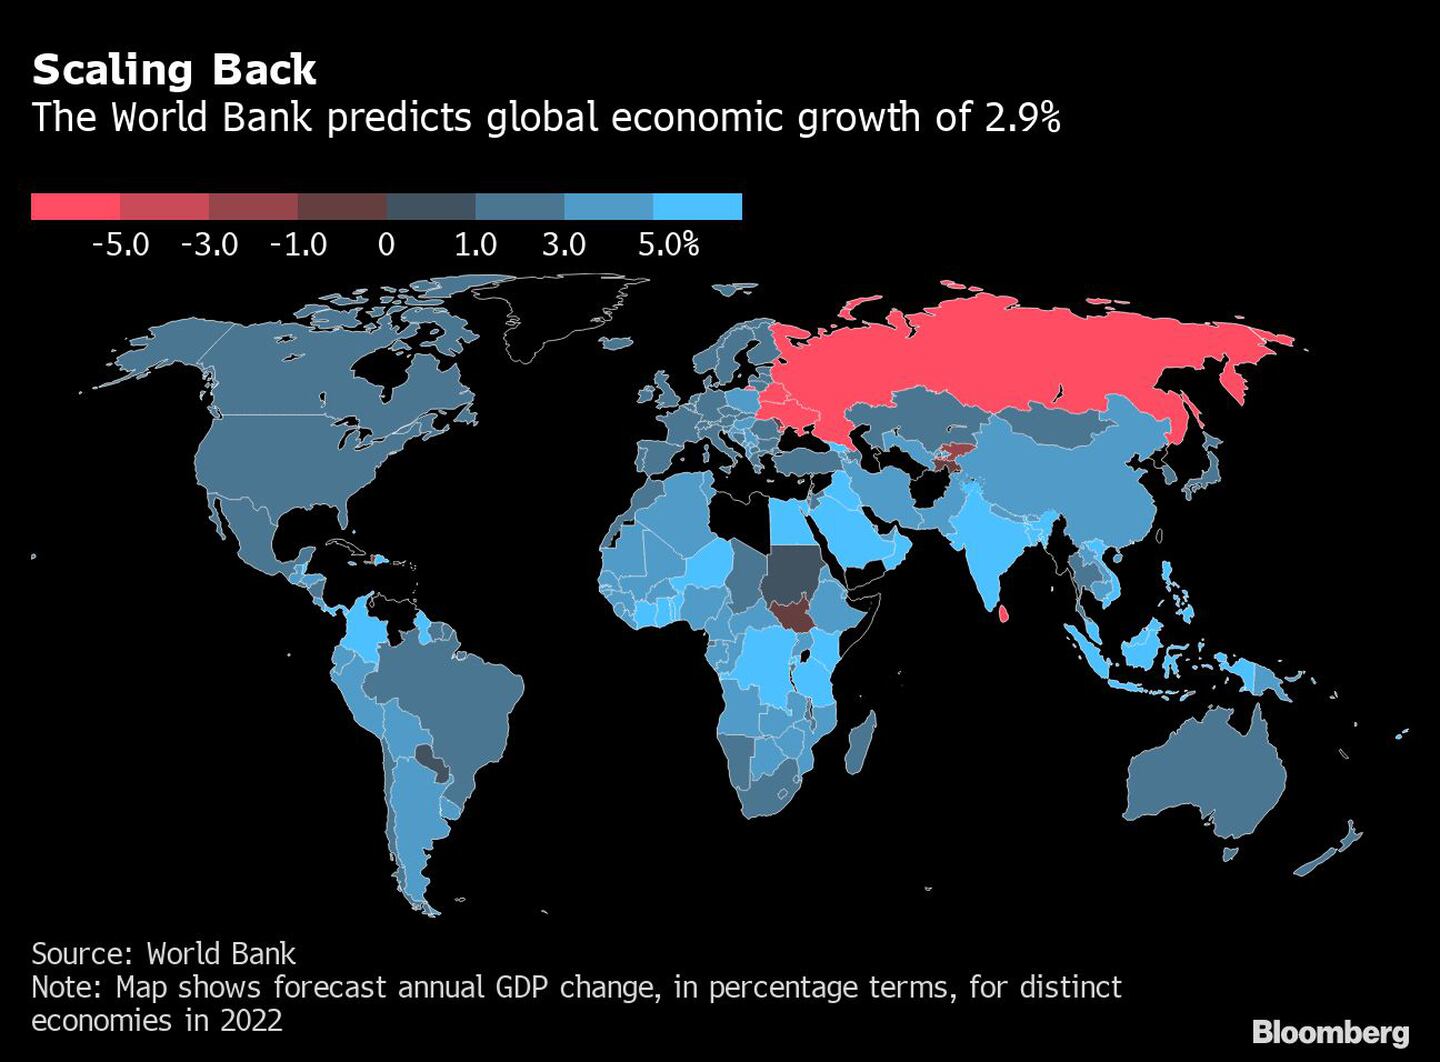 Scaling Back | The World Bank predicts global economic growth of 2.9%dfd